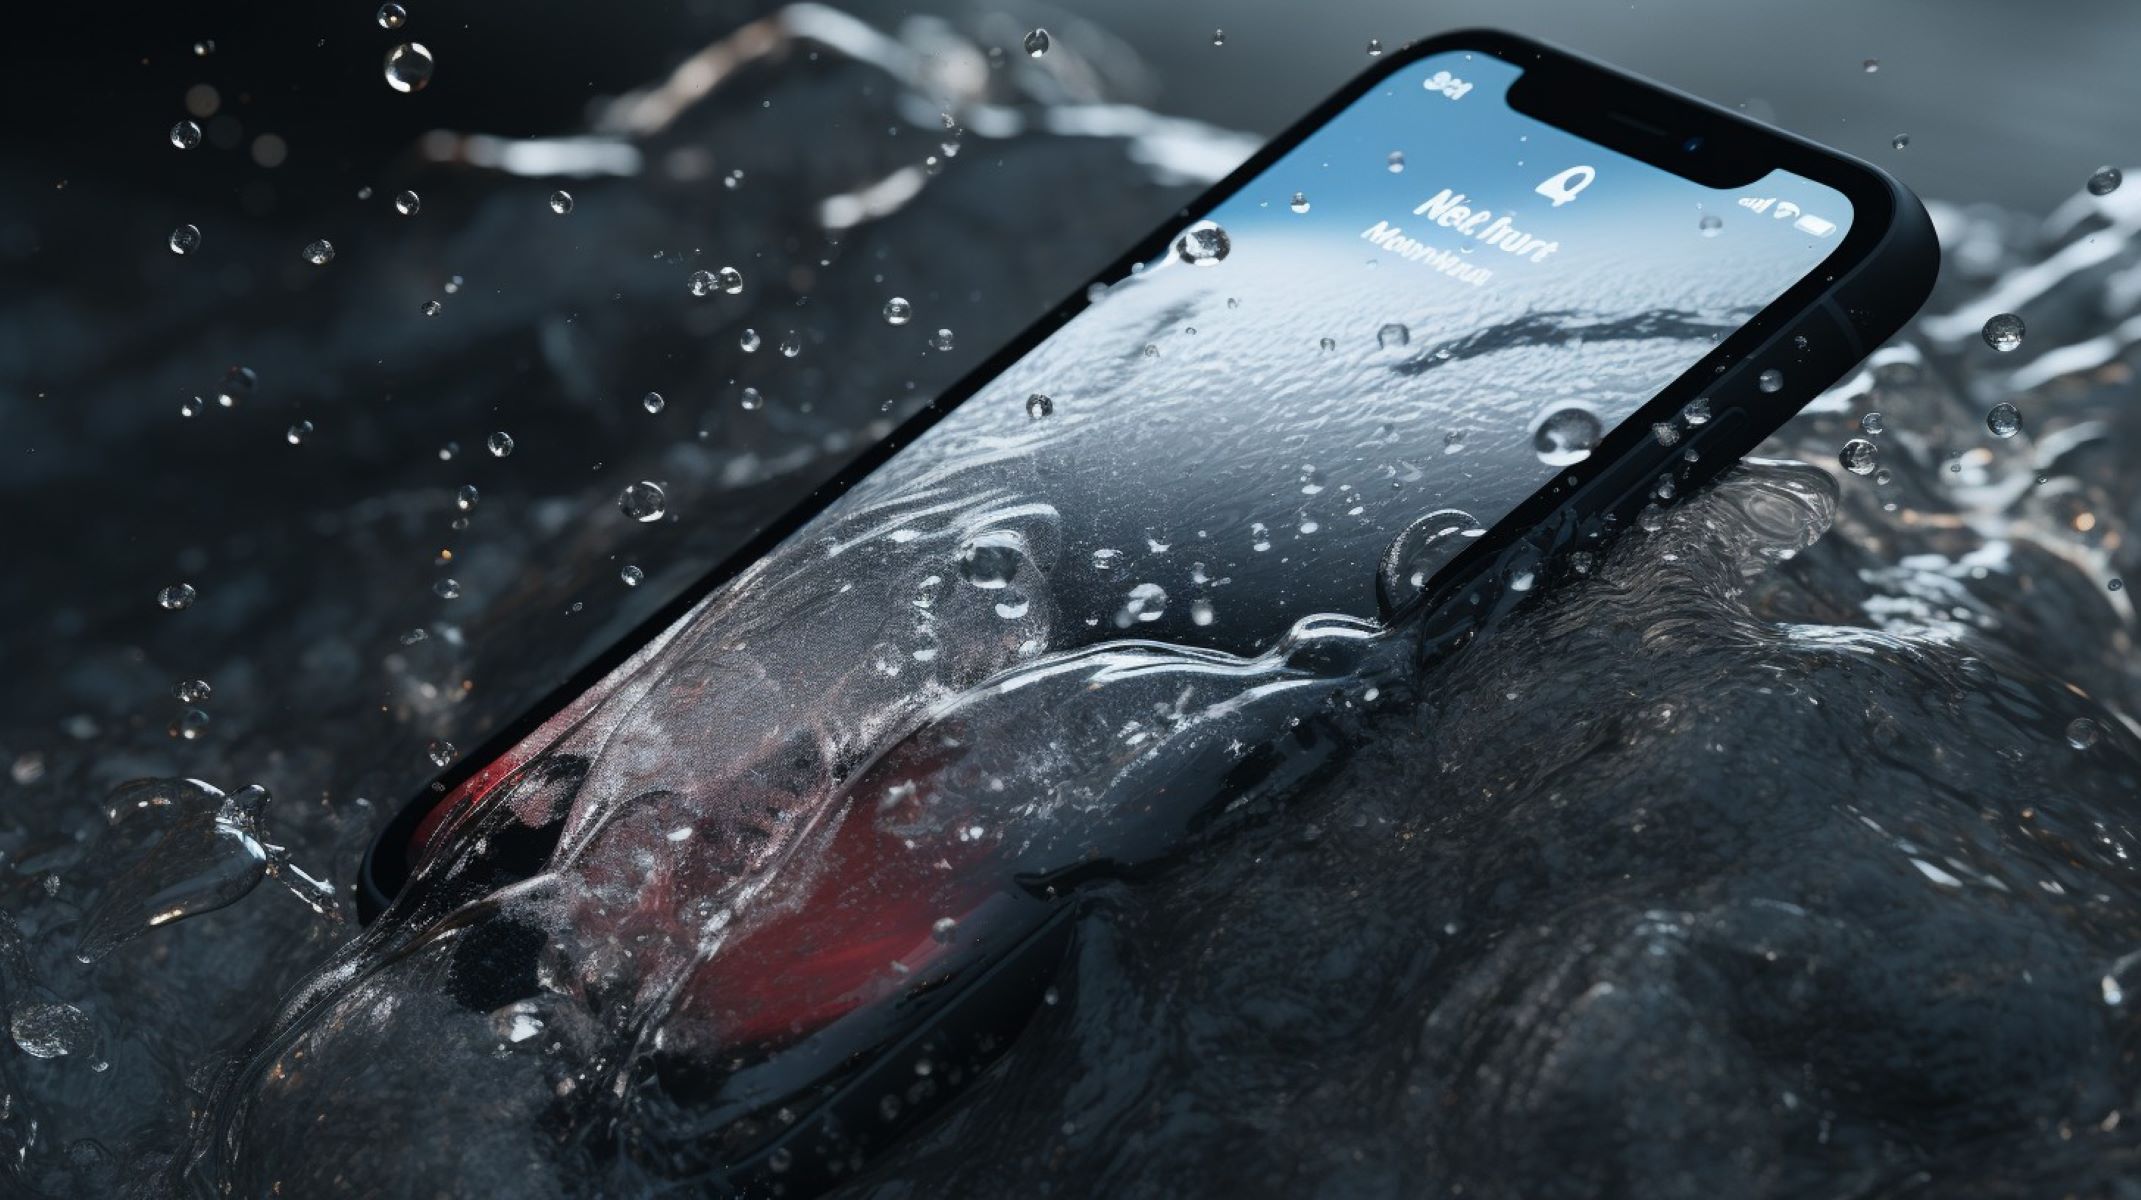 Water Resistance Explained: Assessing The Waterproof Capability Of IPhone 11